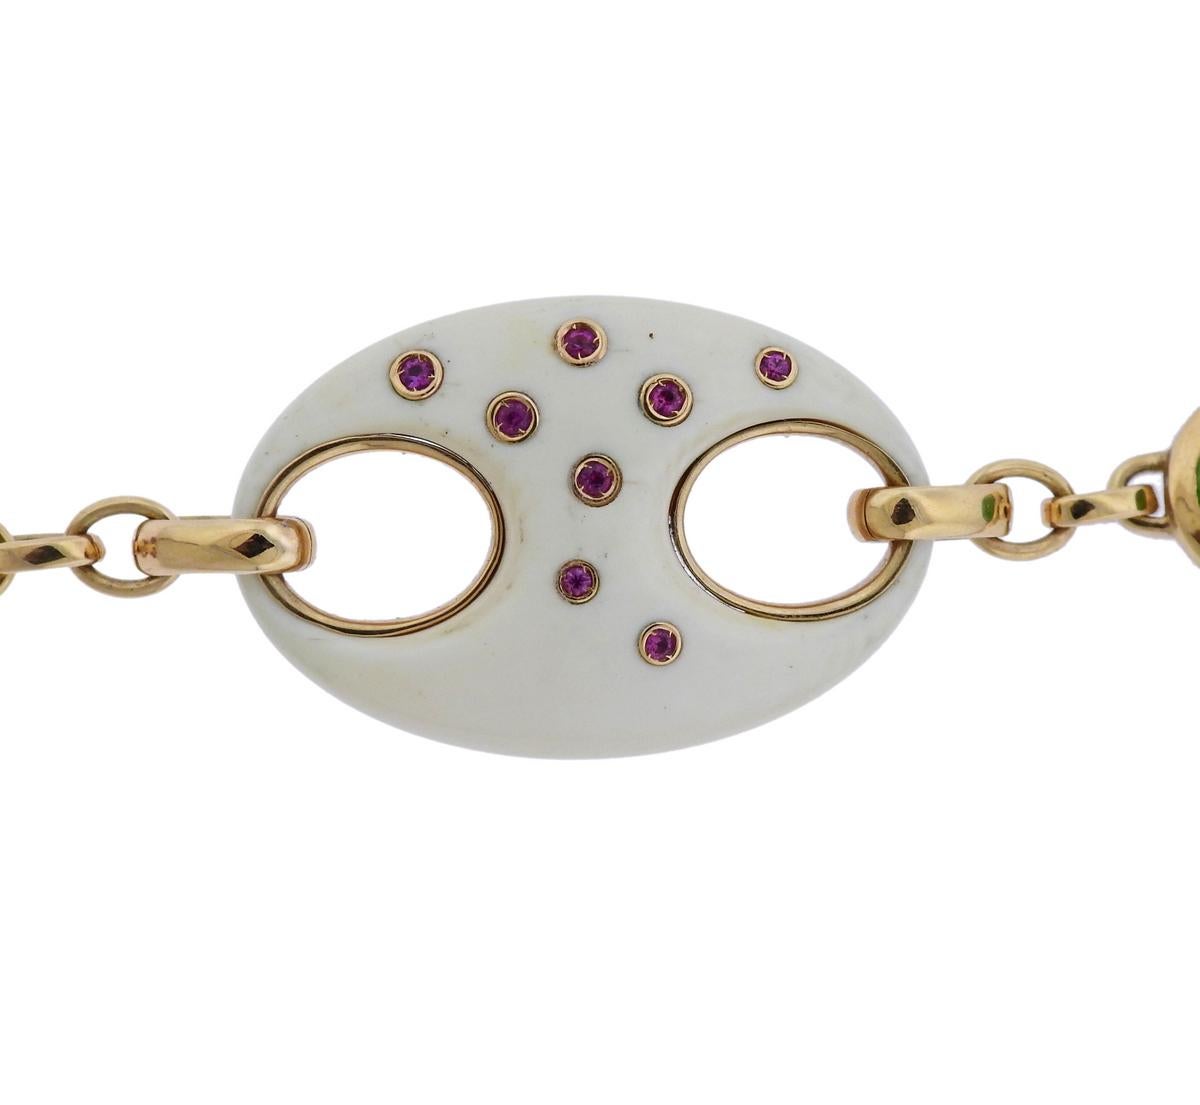 18k gold link bracelet, designed by Valente, featuring pink sapphires, ebony, peridot cabochon and approx. 0.08ctw in diamonds.  Bracelet is 9.5